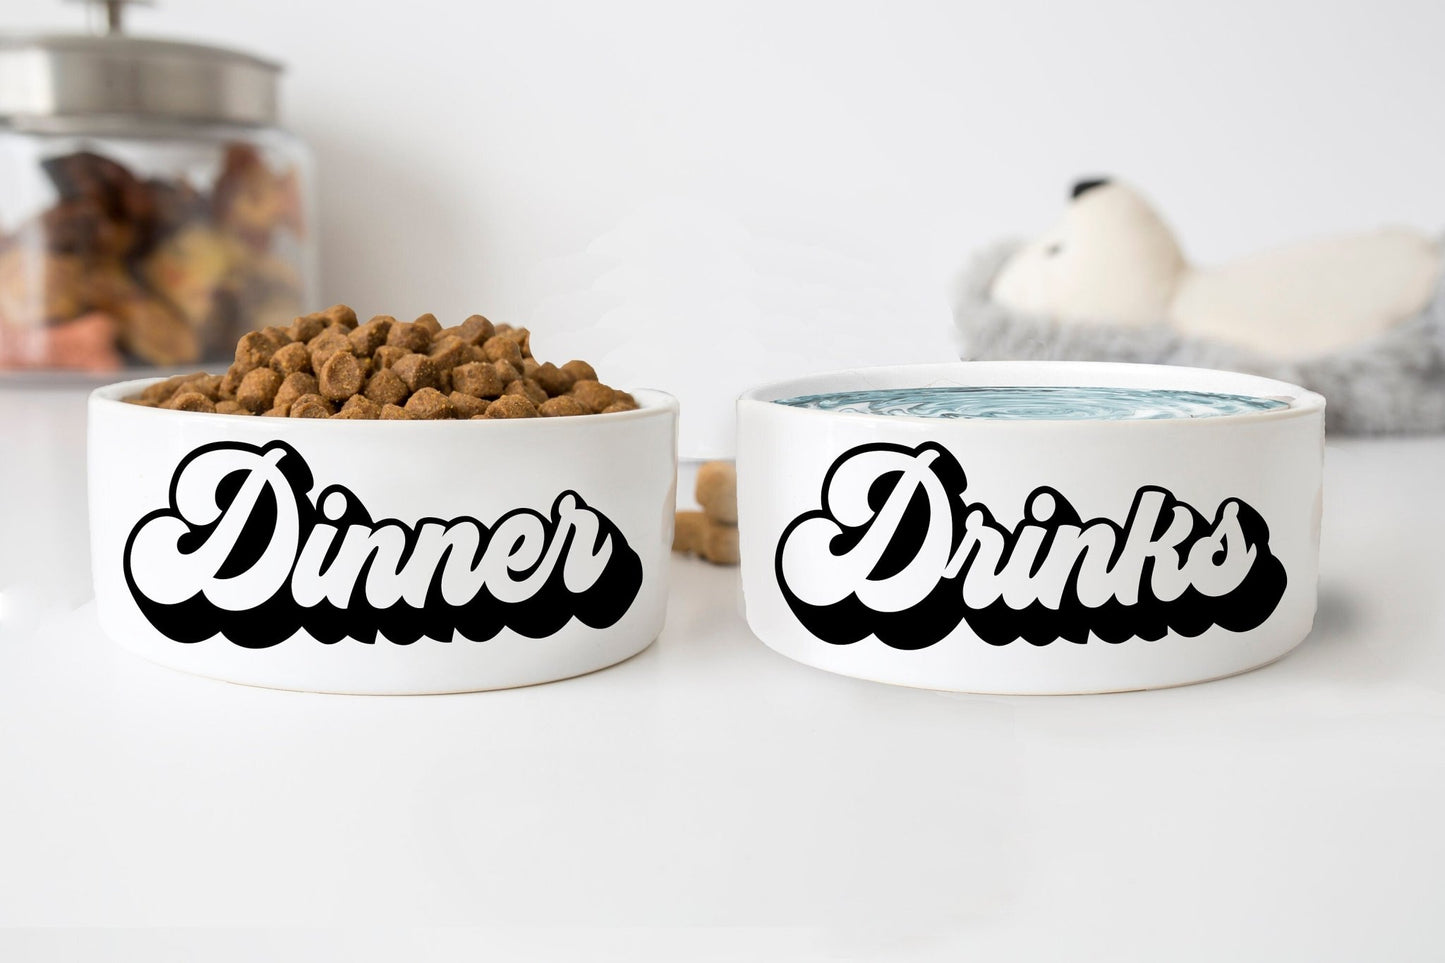 Retro Dog Bowl New Dog Gift Funny Dog Gift Pet Food Bowl Water Bowl Cat Bowls Dinner Drinks Personalized Dog Bowl Ceramic 6" or 7" White 1 - Squishy Cheeks